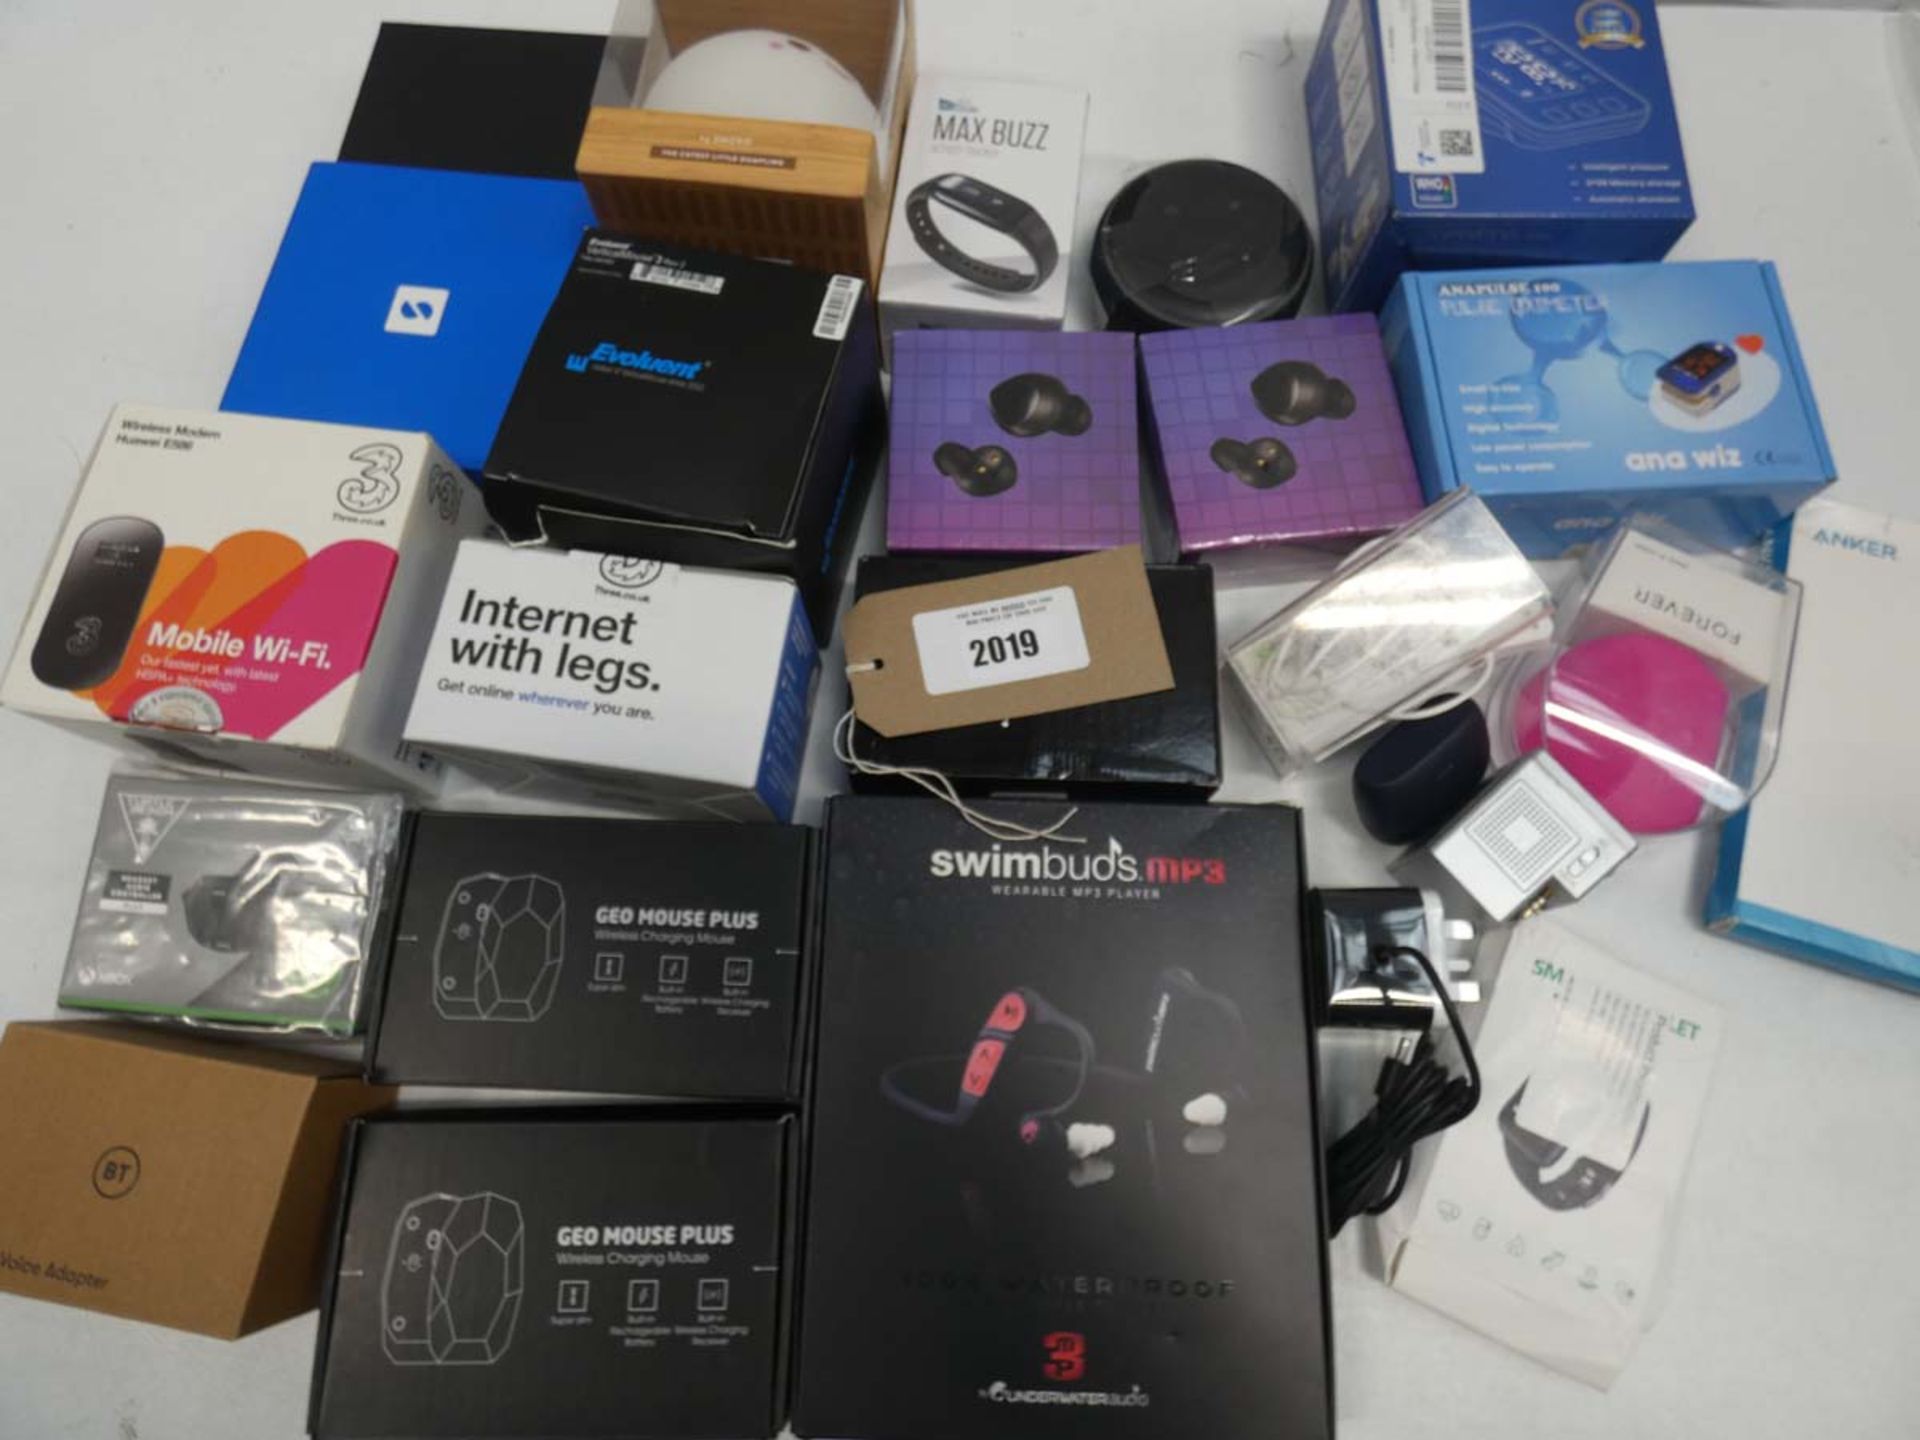 Bag containing wireless earphones, PC mice, blood pressure monitor, oximeter, mobile WiFi, SumUp